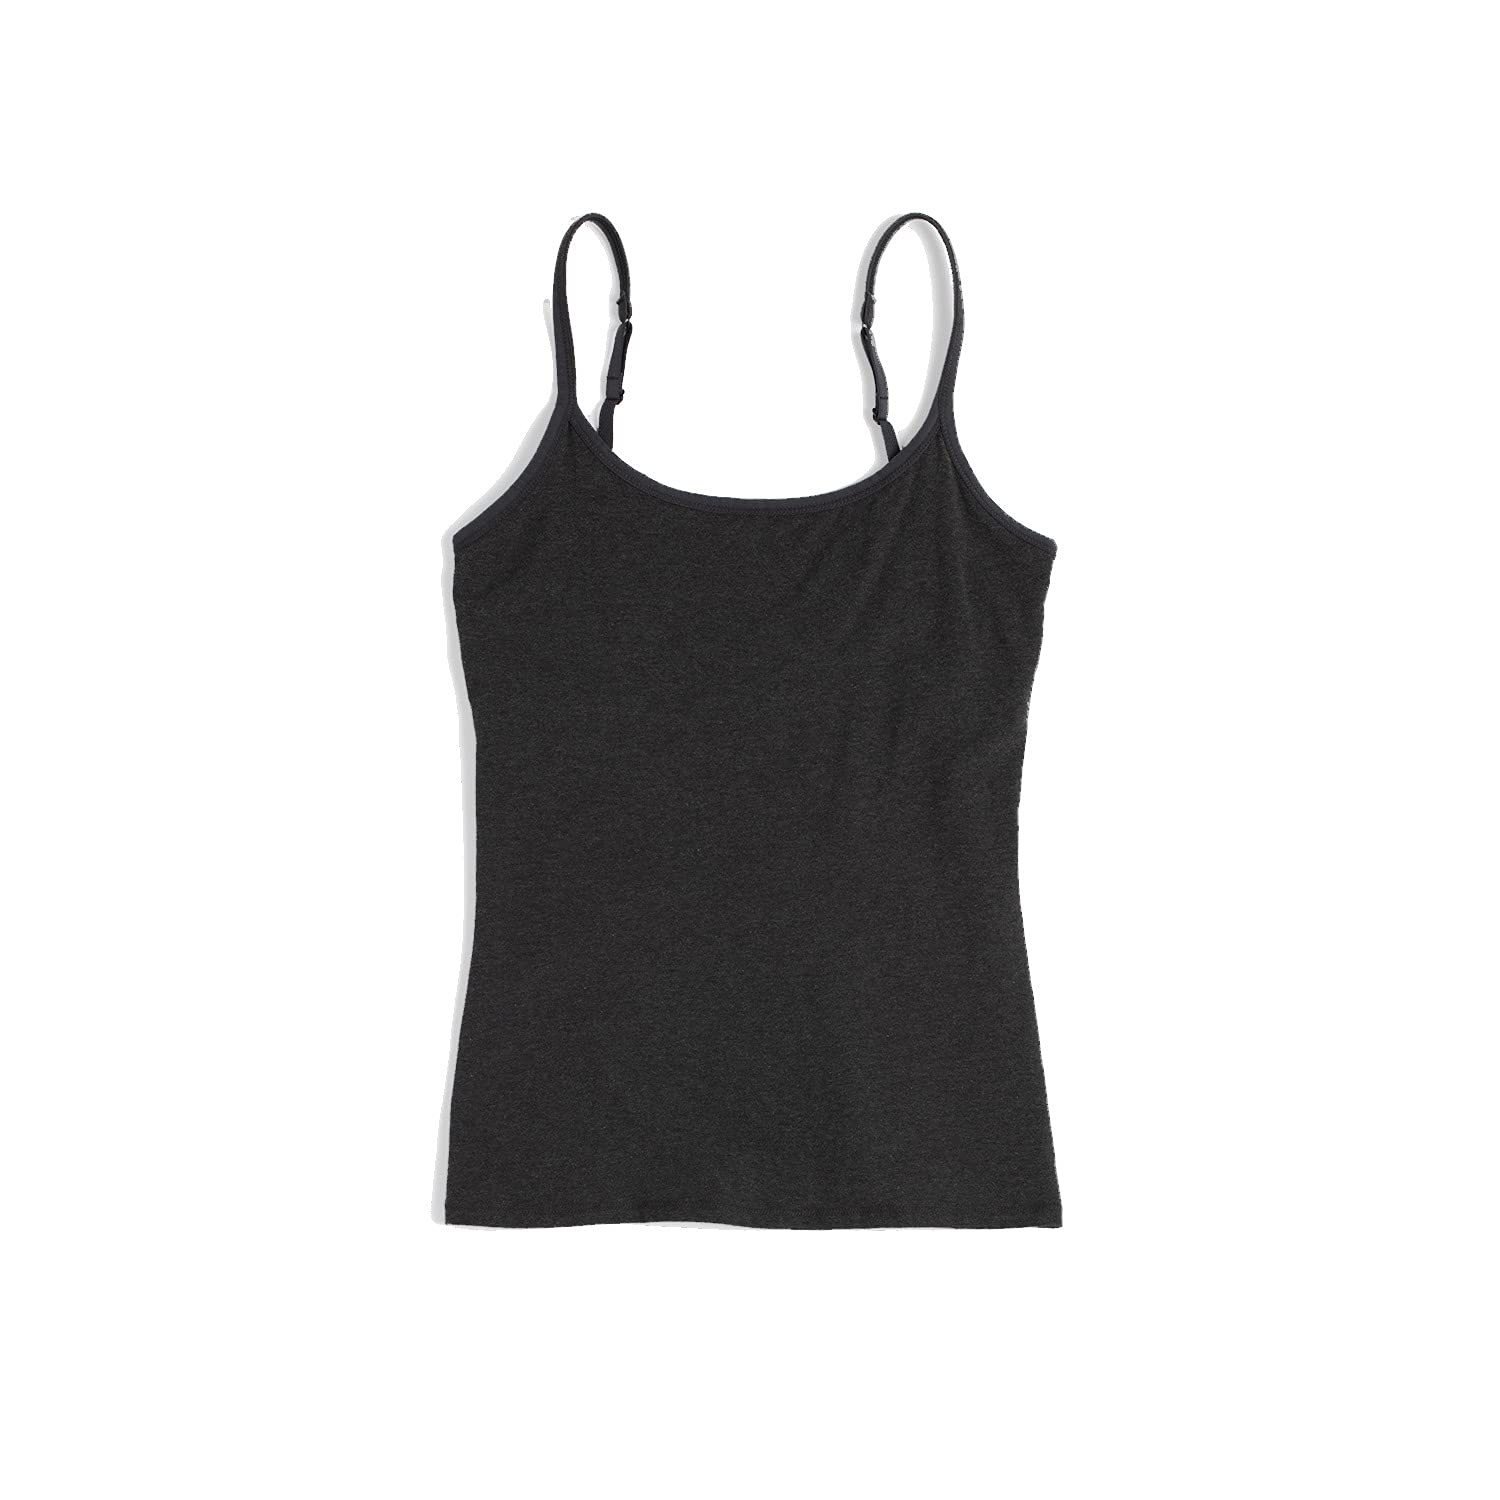 Pact Women's Organic Cotton Camisole Tank Top with Built-in Shelf Bra